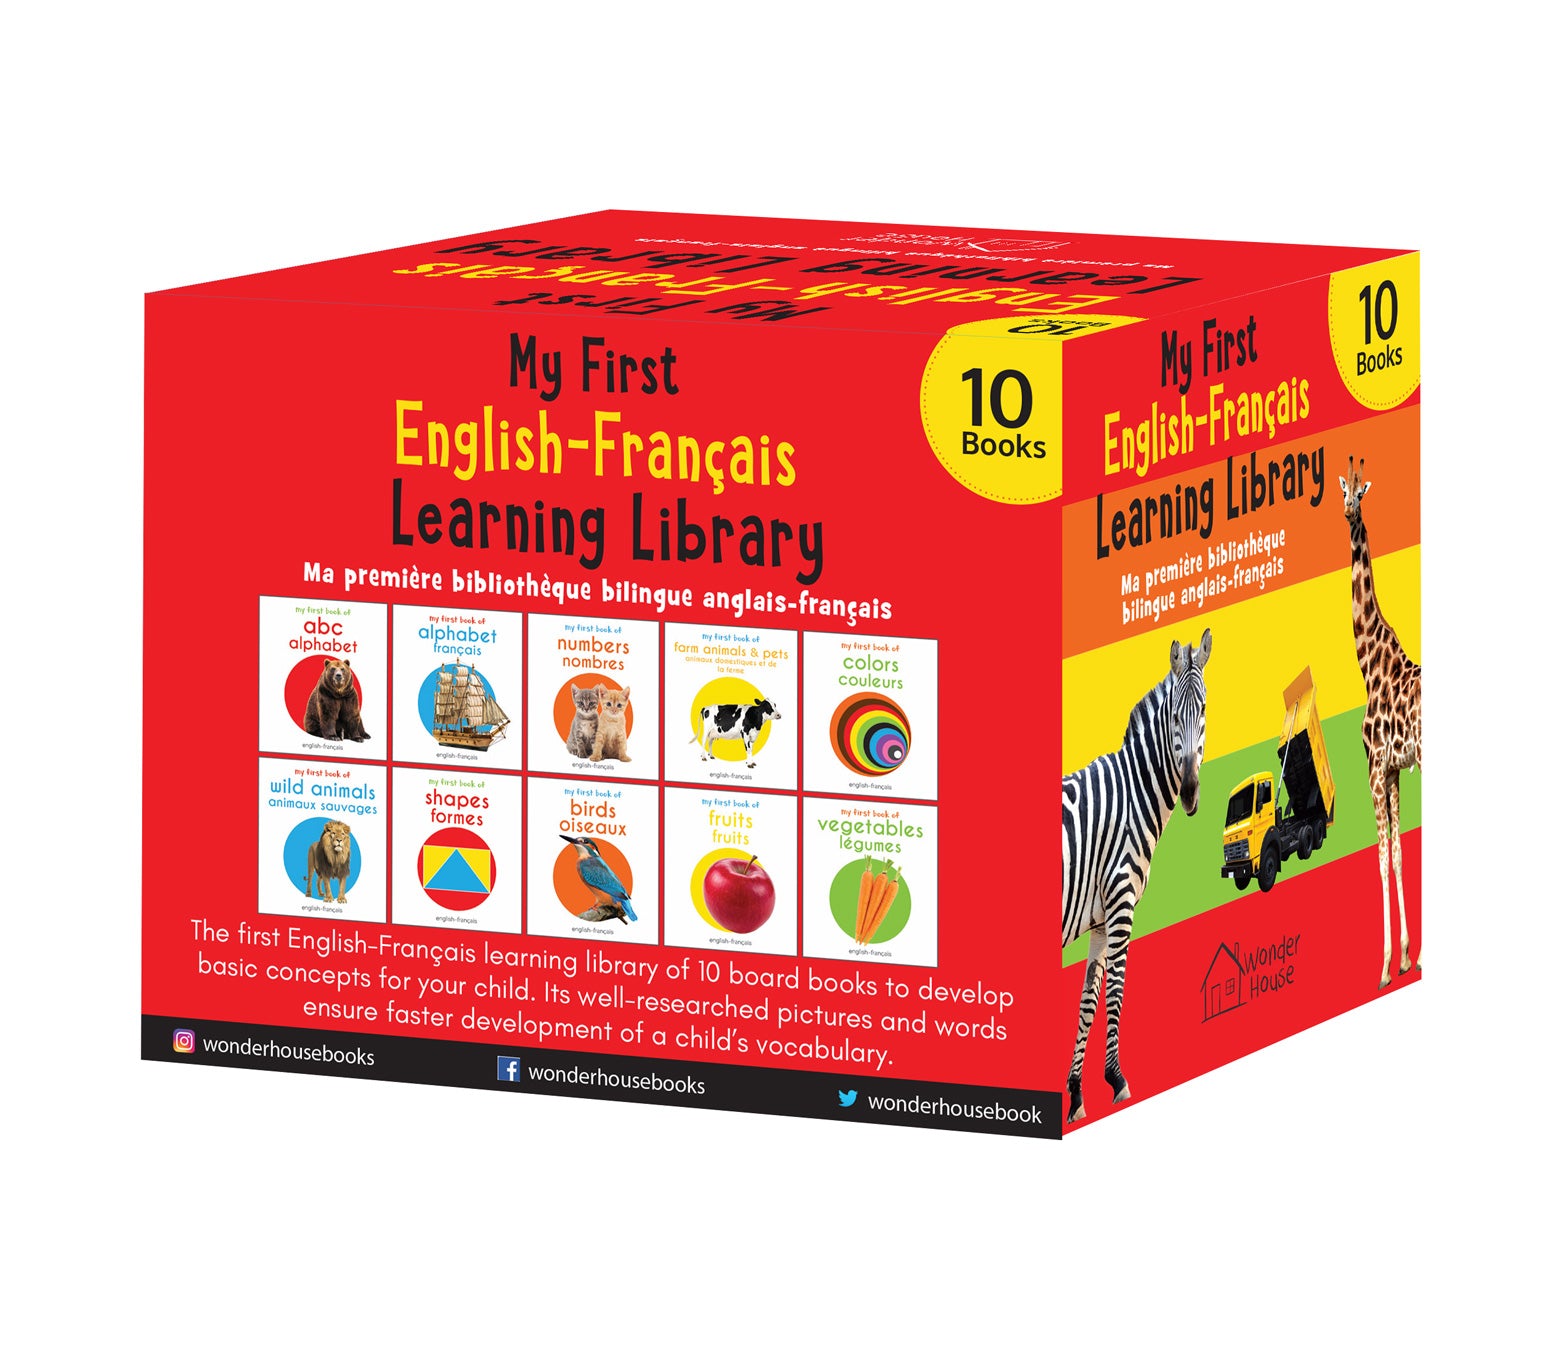 My First English-Franais Learning Library (Ma premire bibliothque bilingue anglais-franais) : Boxset of 10 English - French Board Books